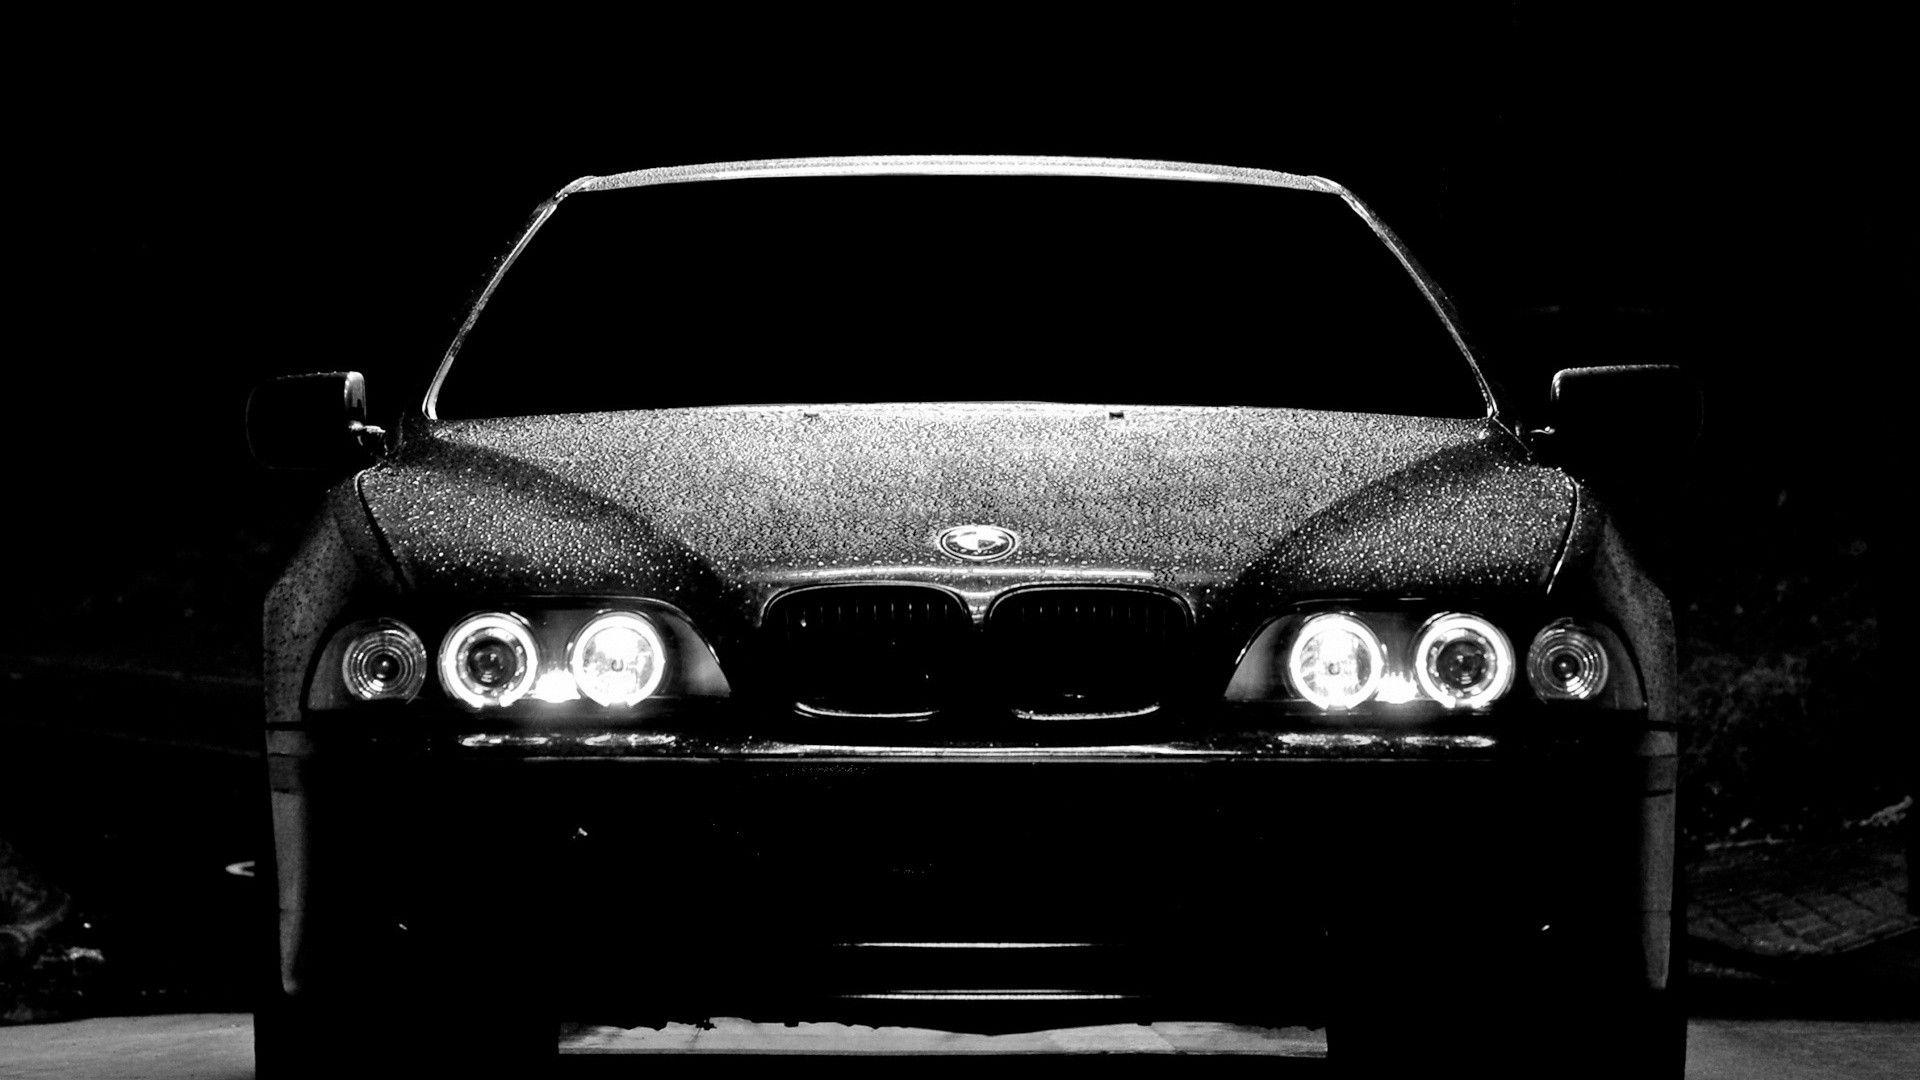 Black Bmw Wallpapers Group